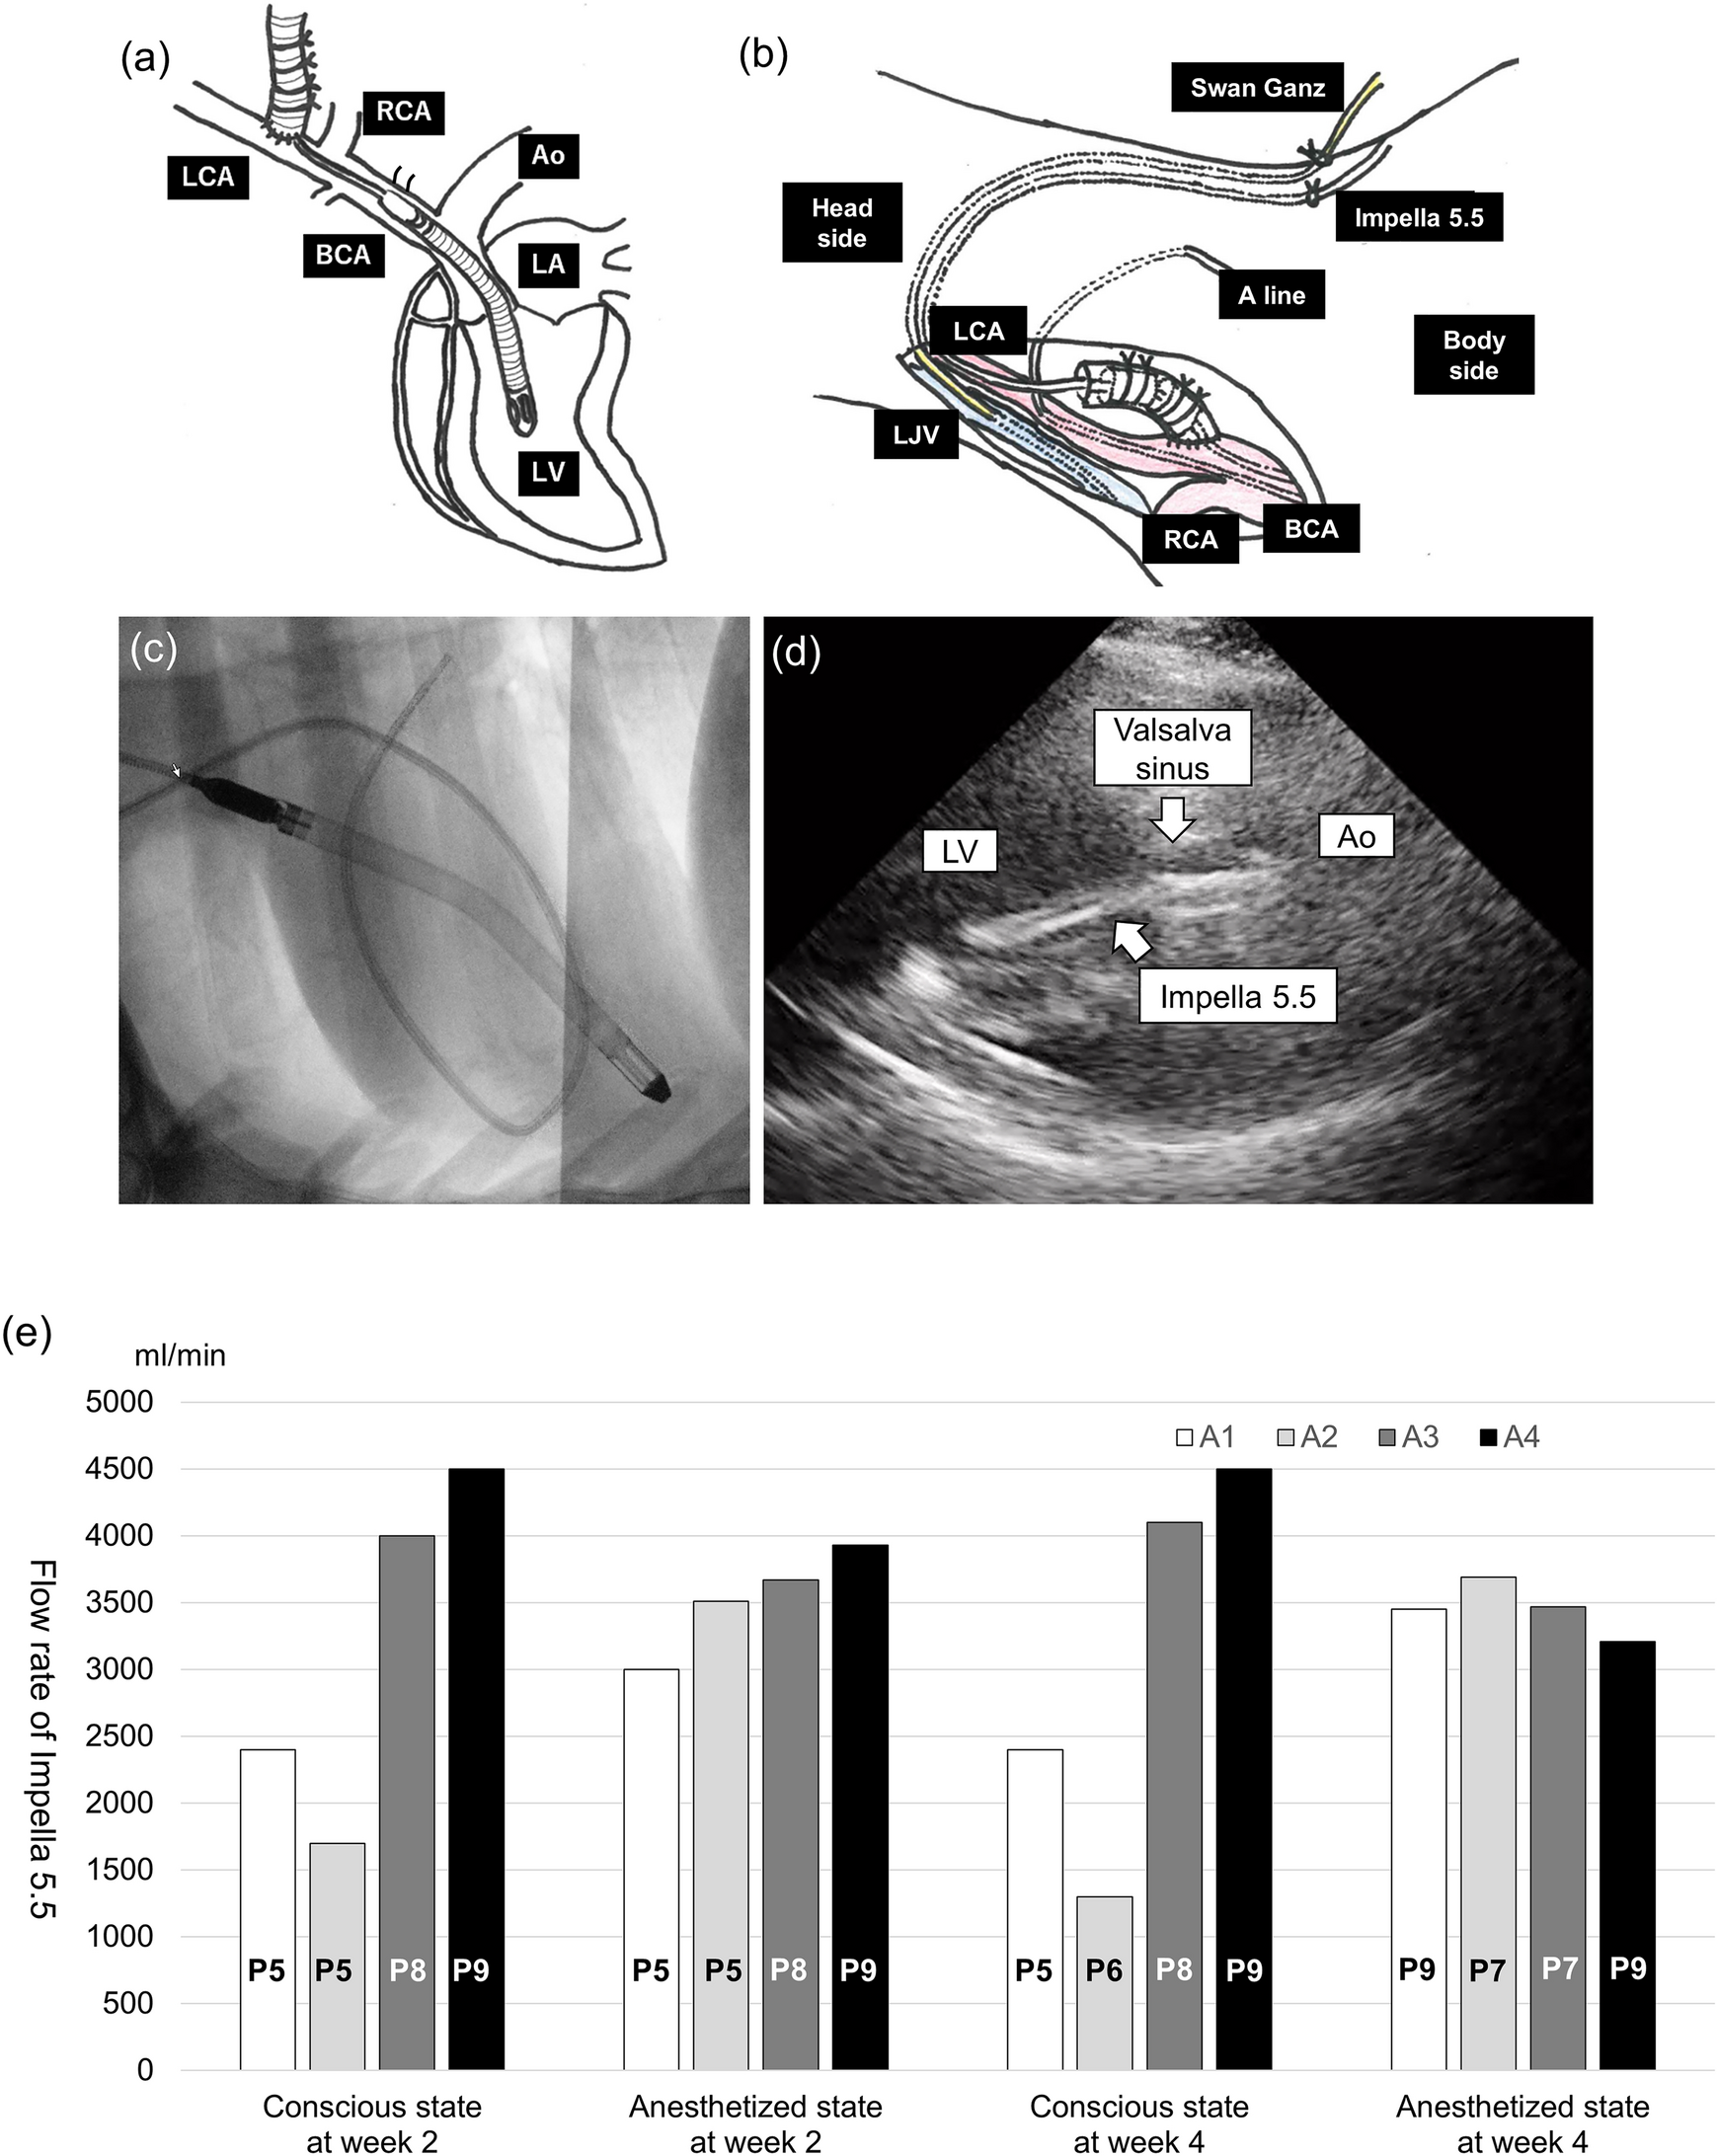 Feasibility of an animal model for long-term mechanical circulatory support with Impella 5.5 implanted through carotid artery access in sheep